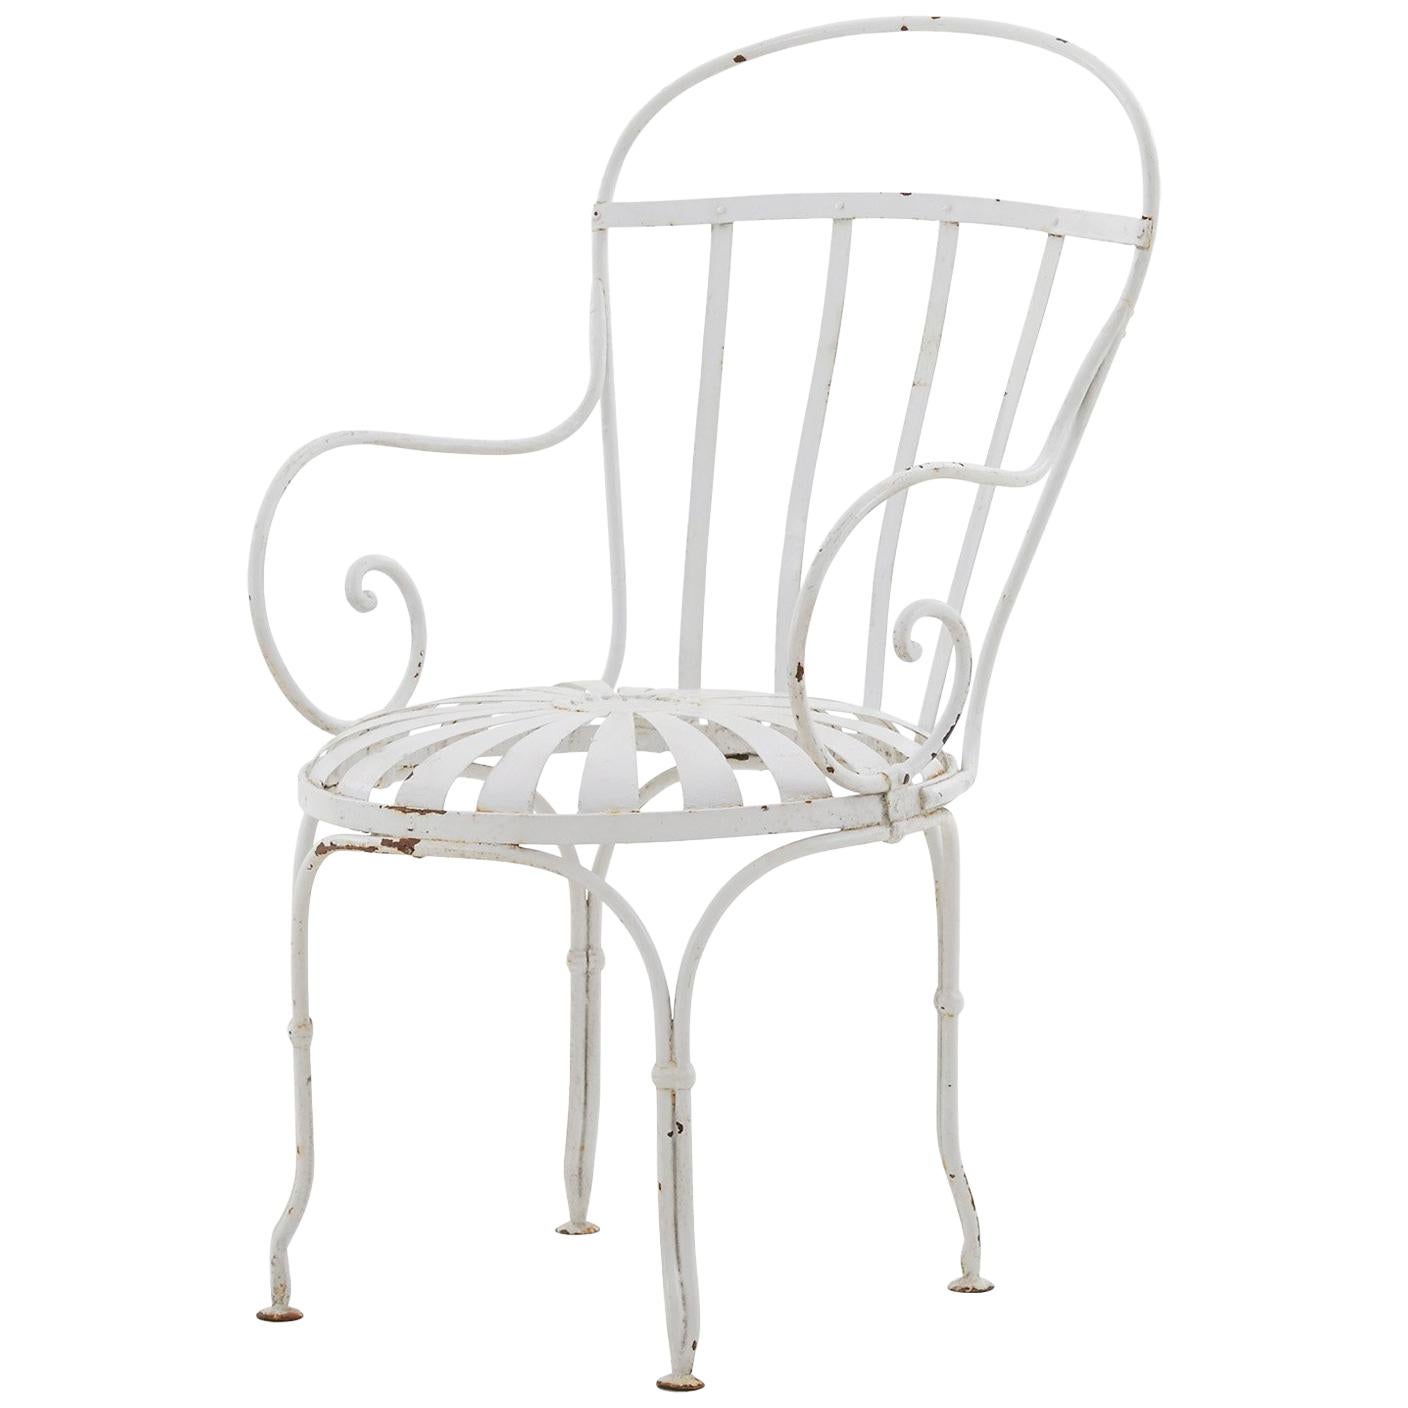 Powder Coated White Metal Patio Chair For Sale